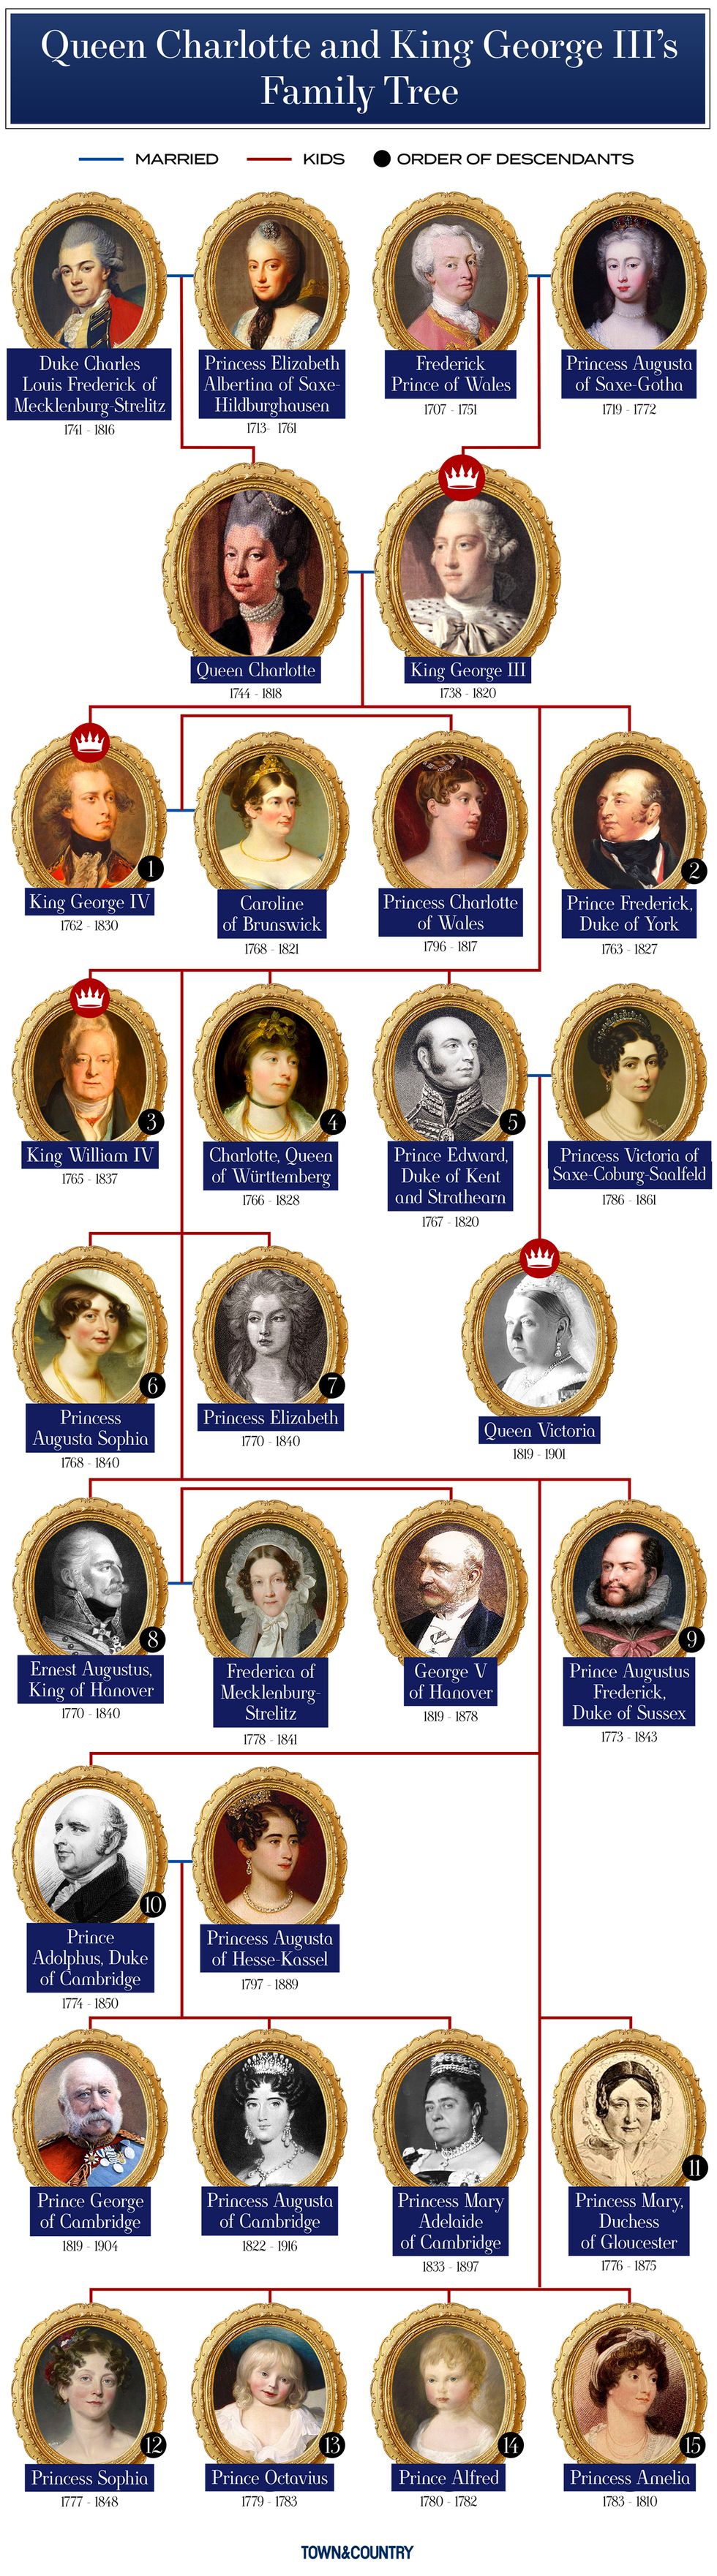 king george iii and queen charlotte family tree